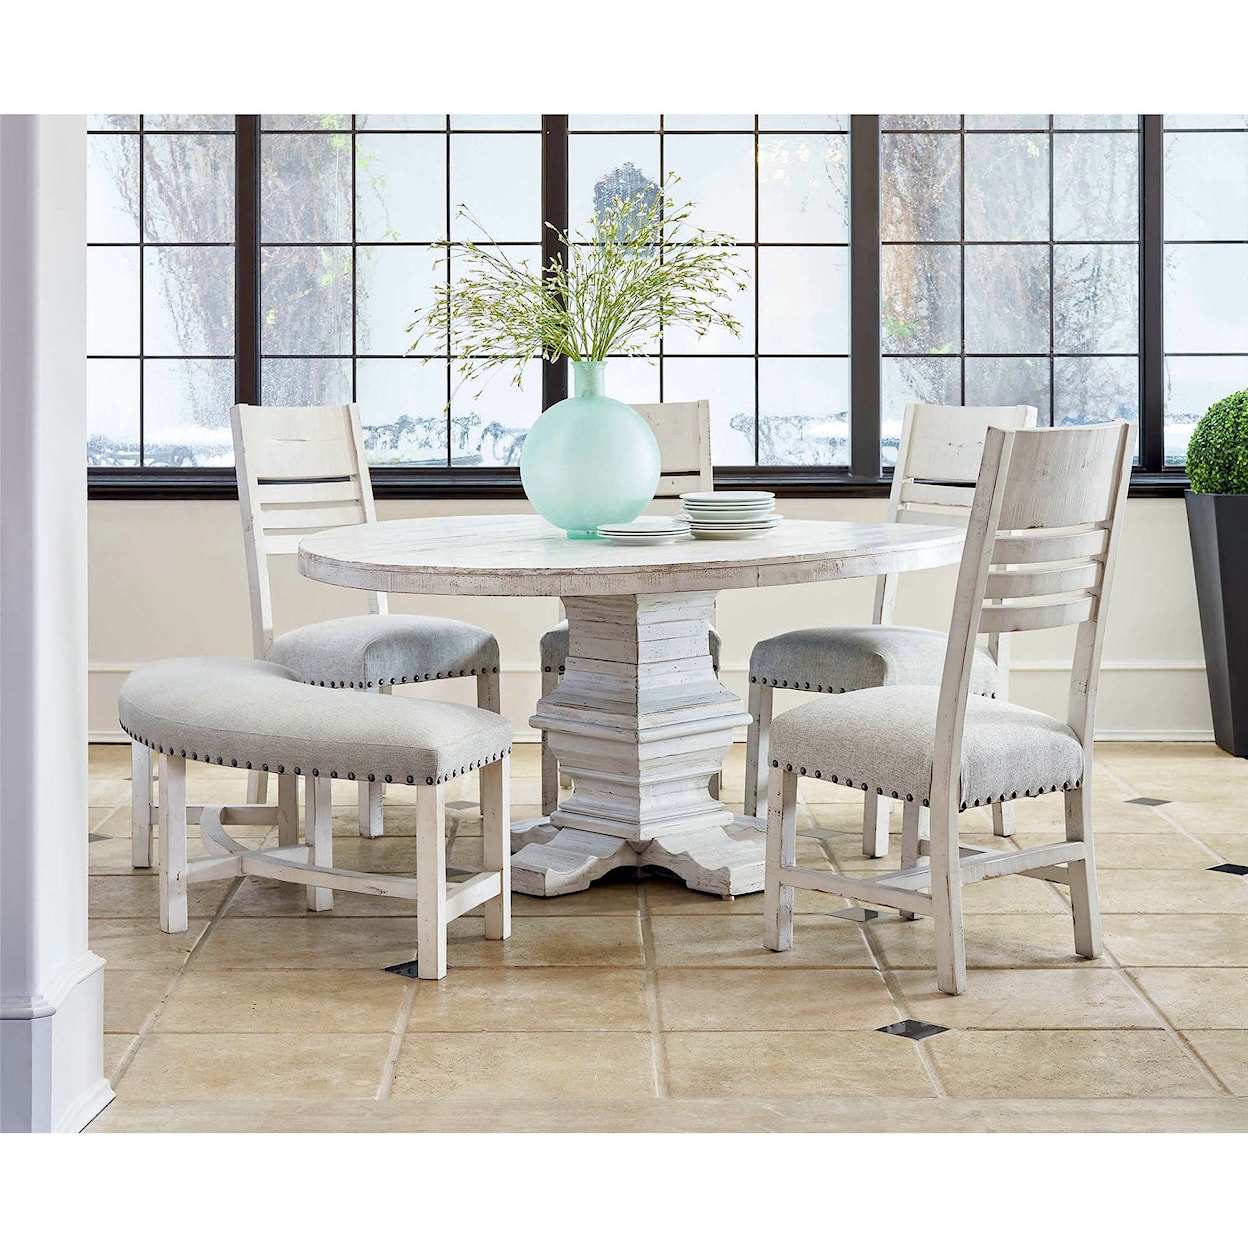 Elements International Condesa Two-Piece Dining Chair Set